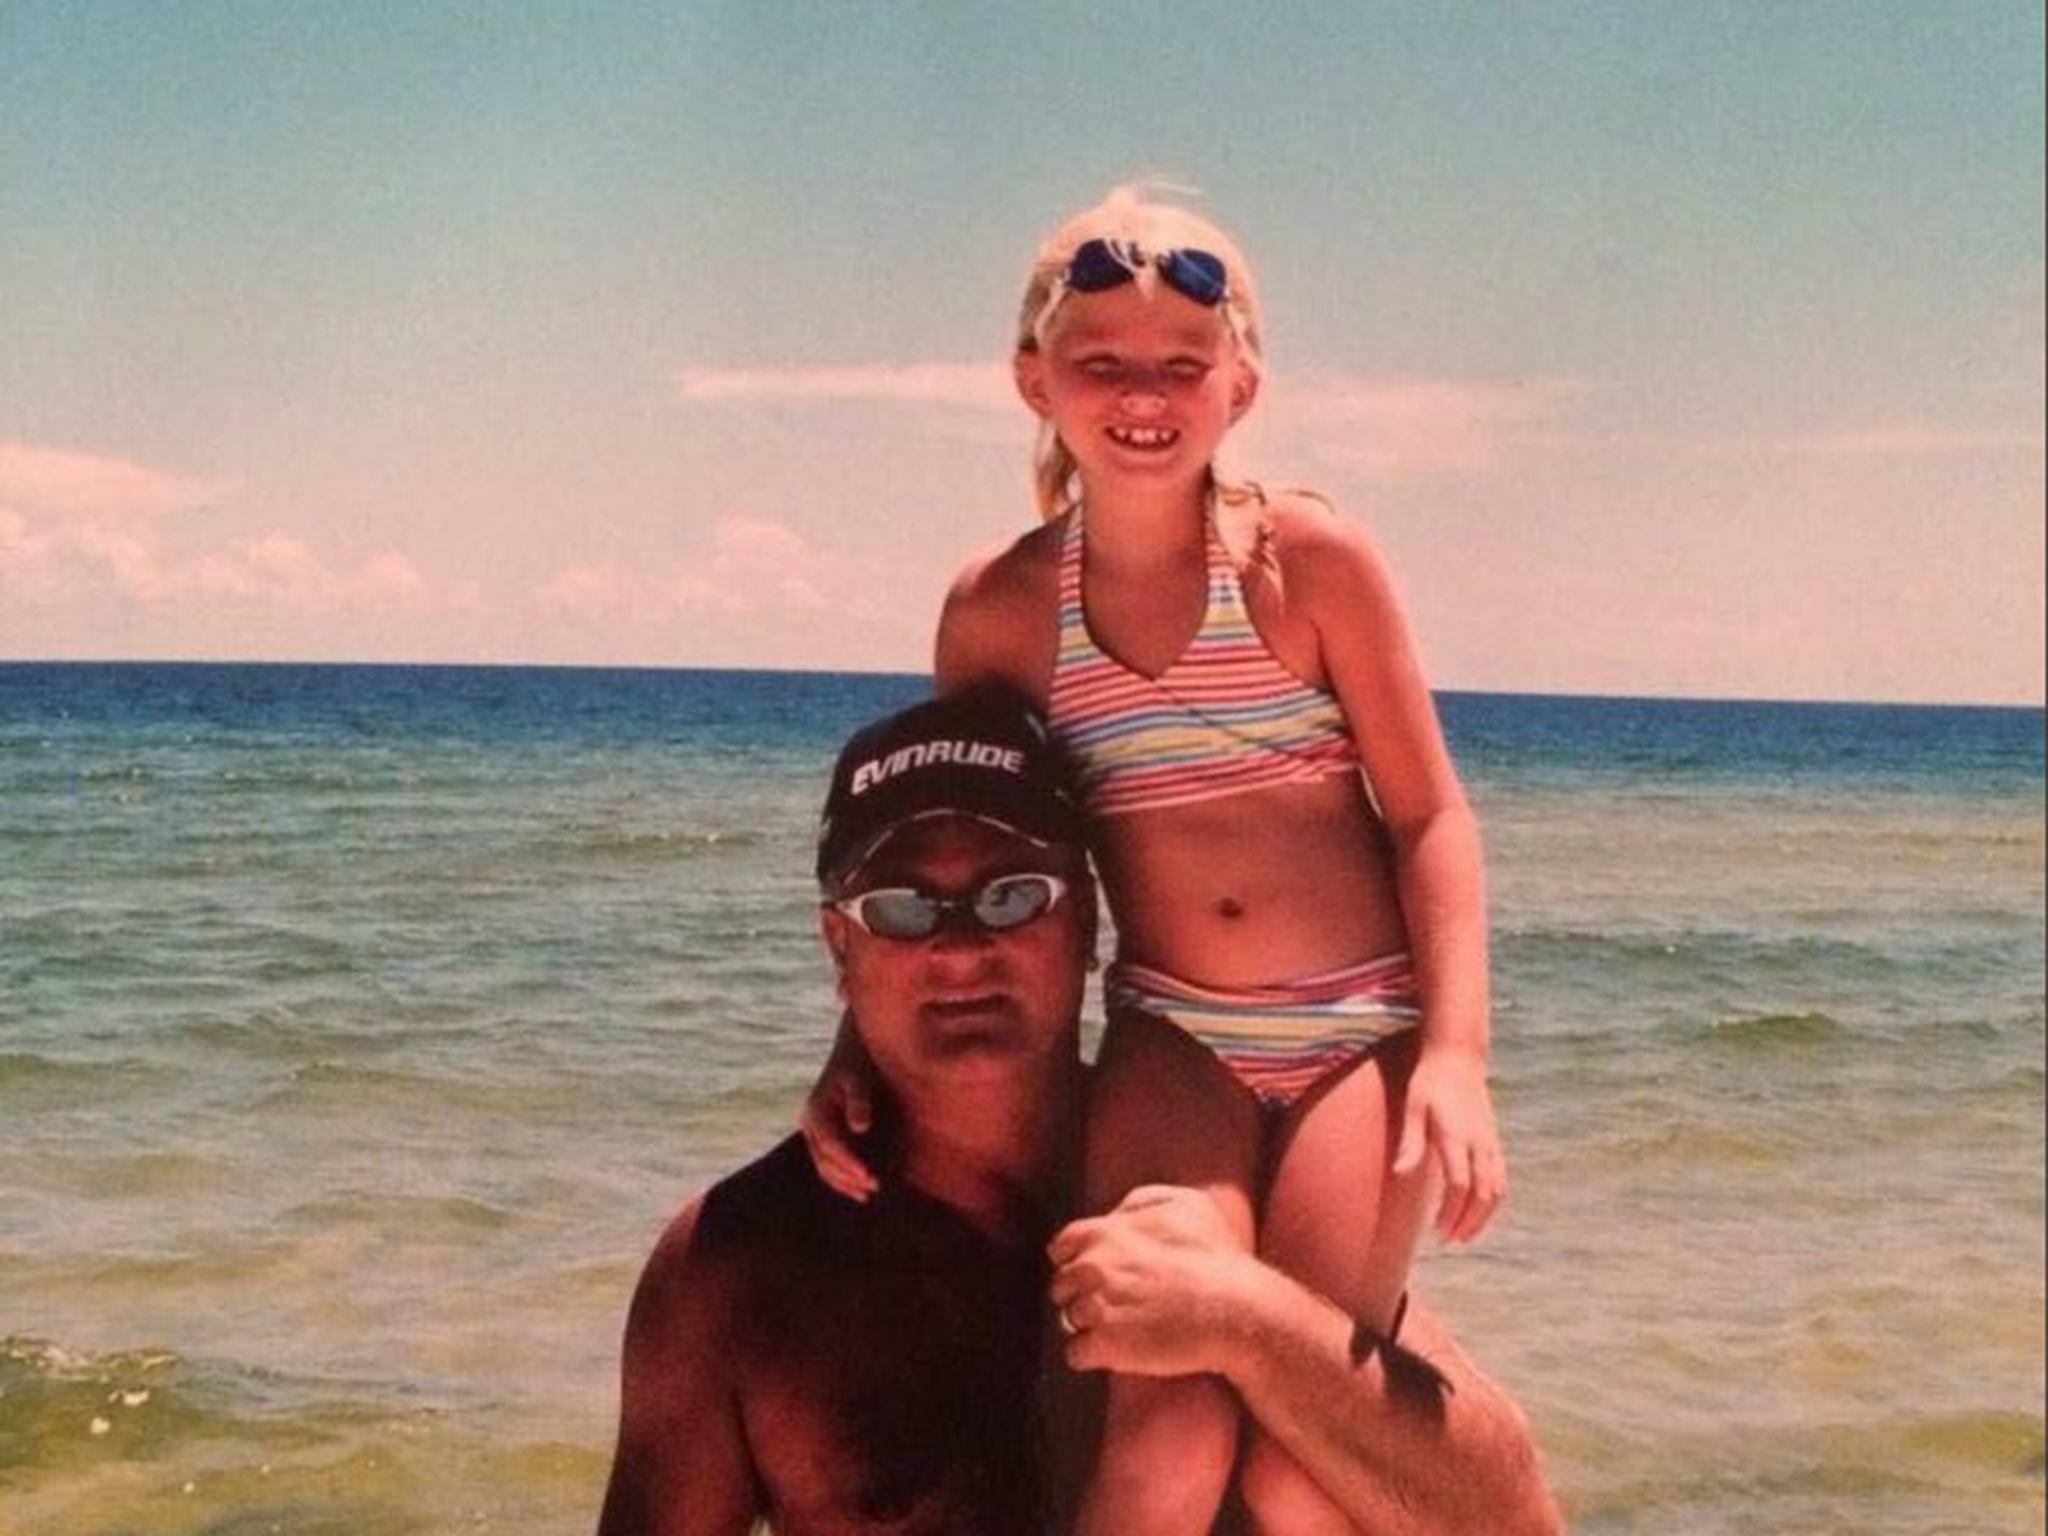 Bailey Sellers was just 16 when her father Michael died